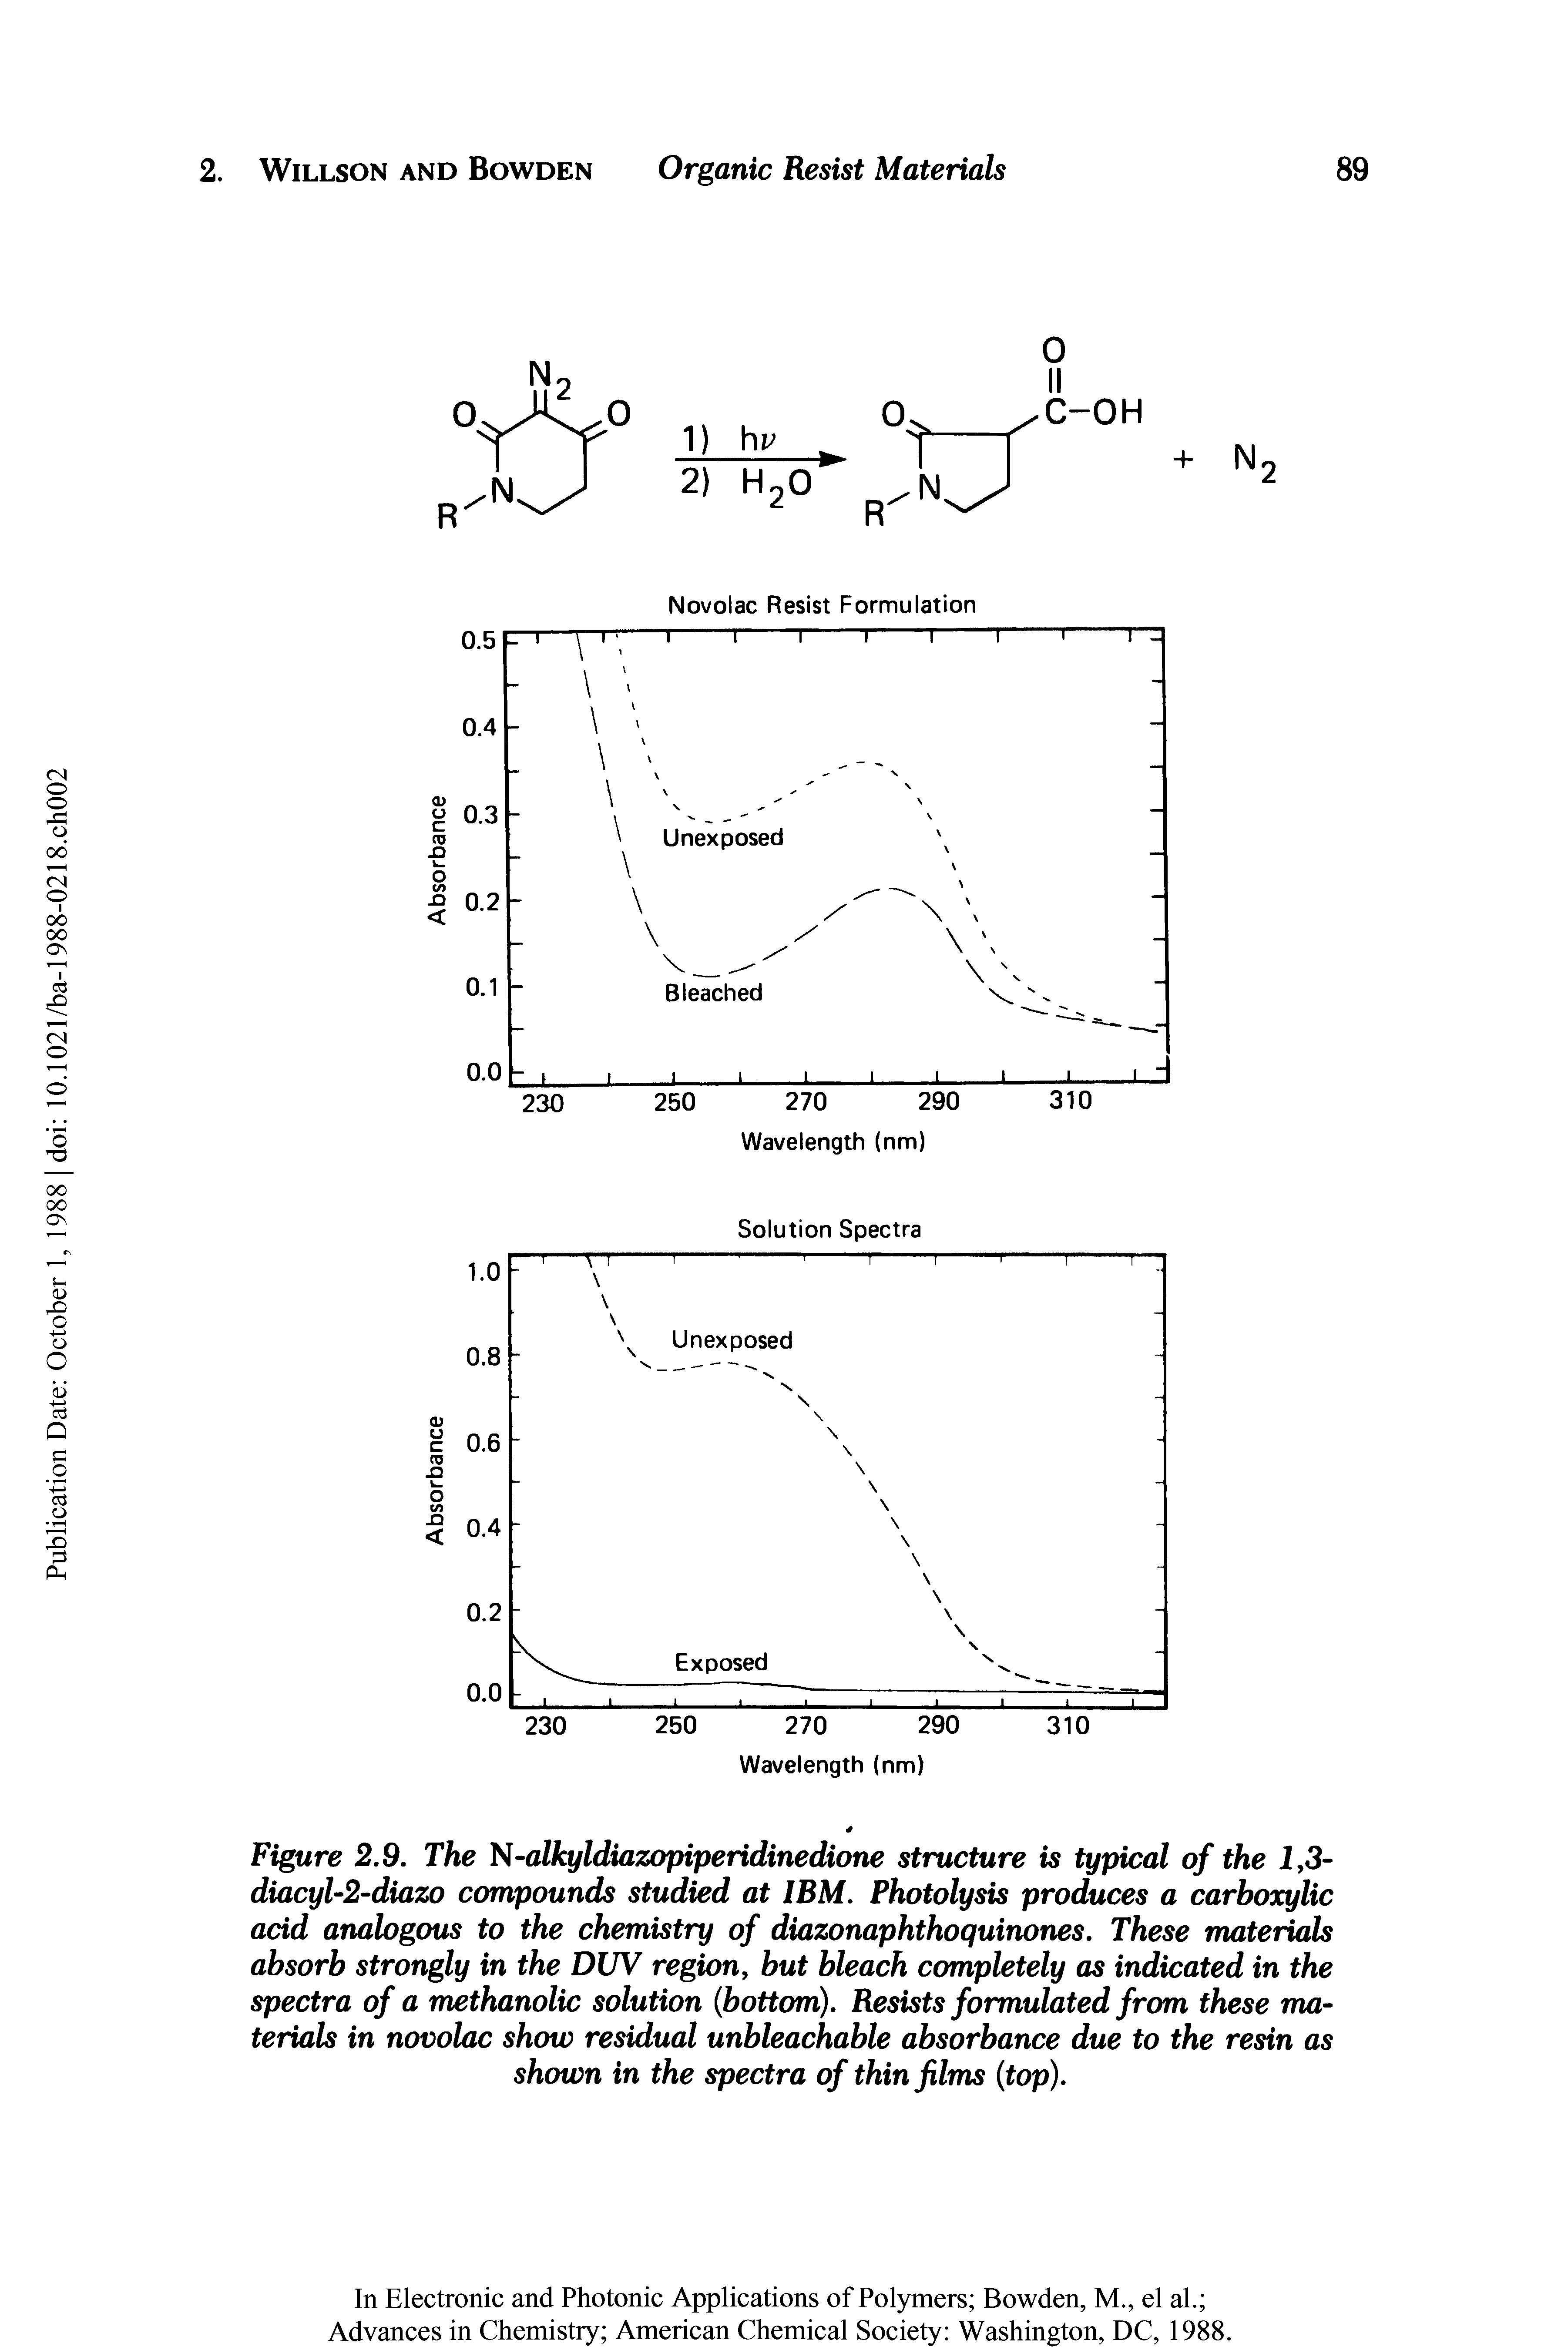 Figure 2.9. The N-alkyldiazopiperidinedione structure is typical of the 1,3-diacyl-2-diazo compounds studied at IBM. Photolysis produces a carboxylic acid analogous to the chemistry of diazonaphthoquinones. These materials absorb strongly in the DUV region, but bleach completely as indicated in the spectra of a methanolic solution bottom). Resists formulated from these materials in novolac show residual unbleachable absorbance due to the resin as shown in the spectra of thin films (top).